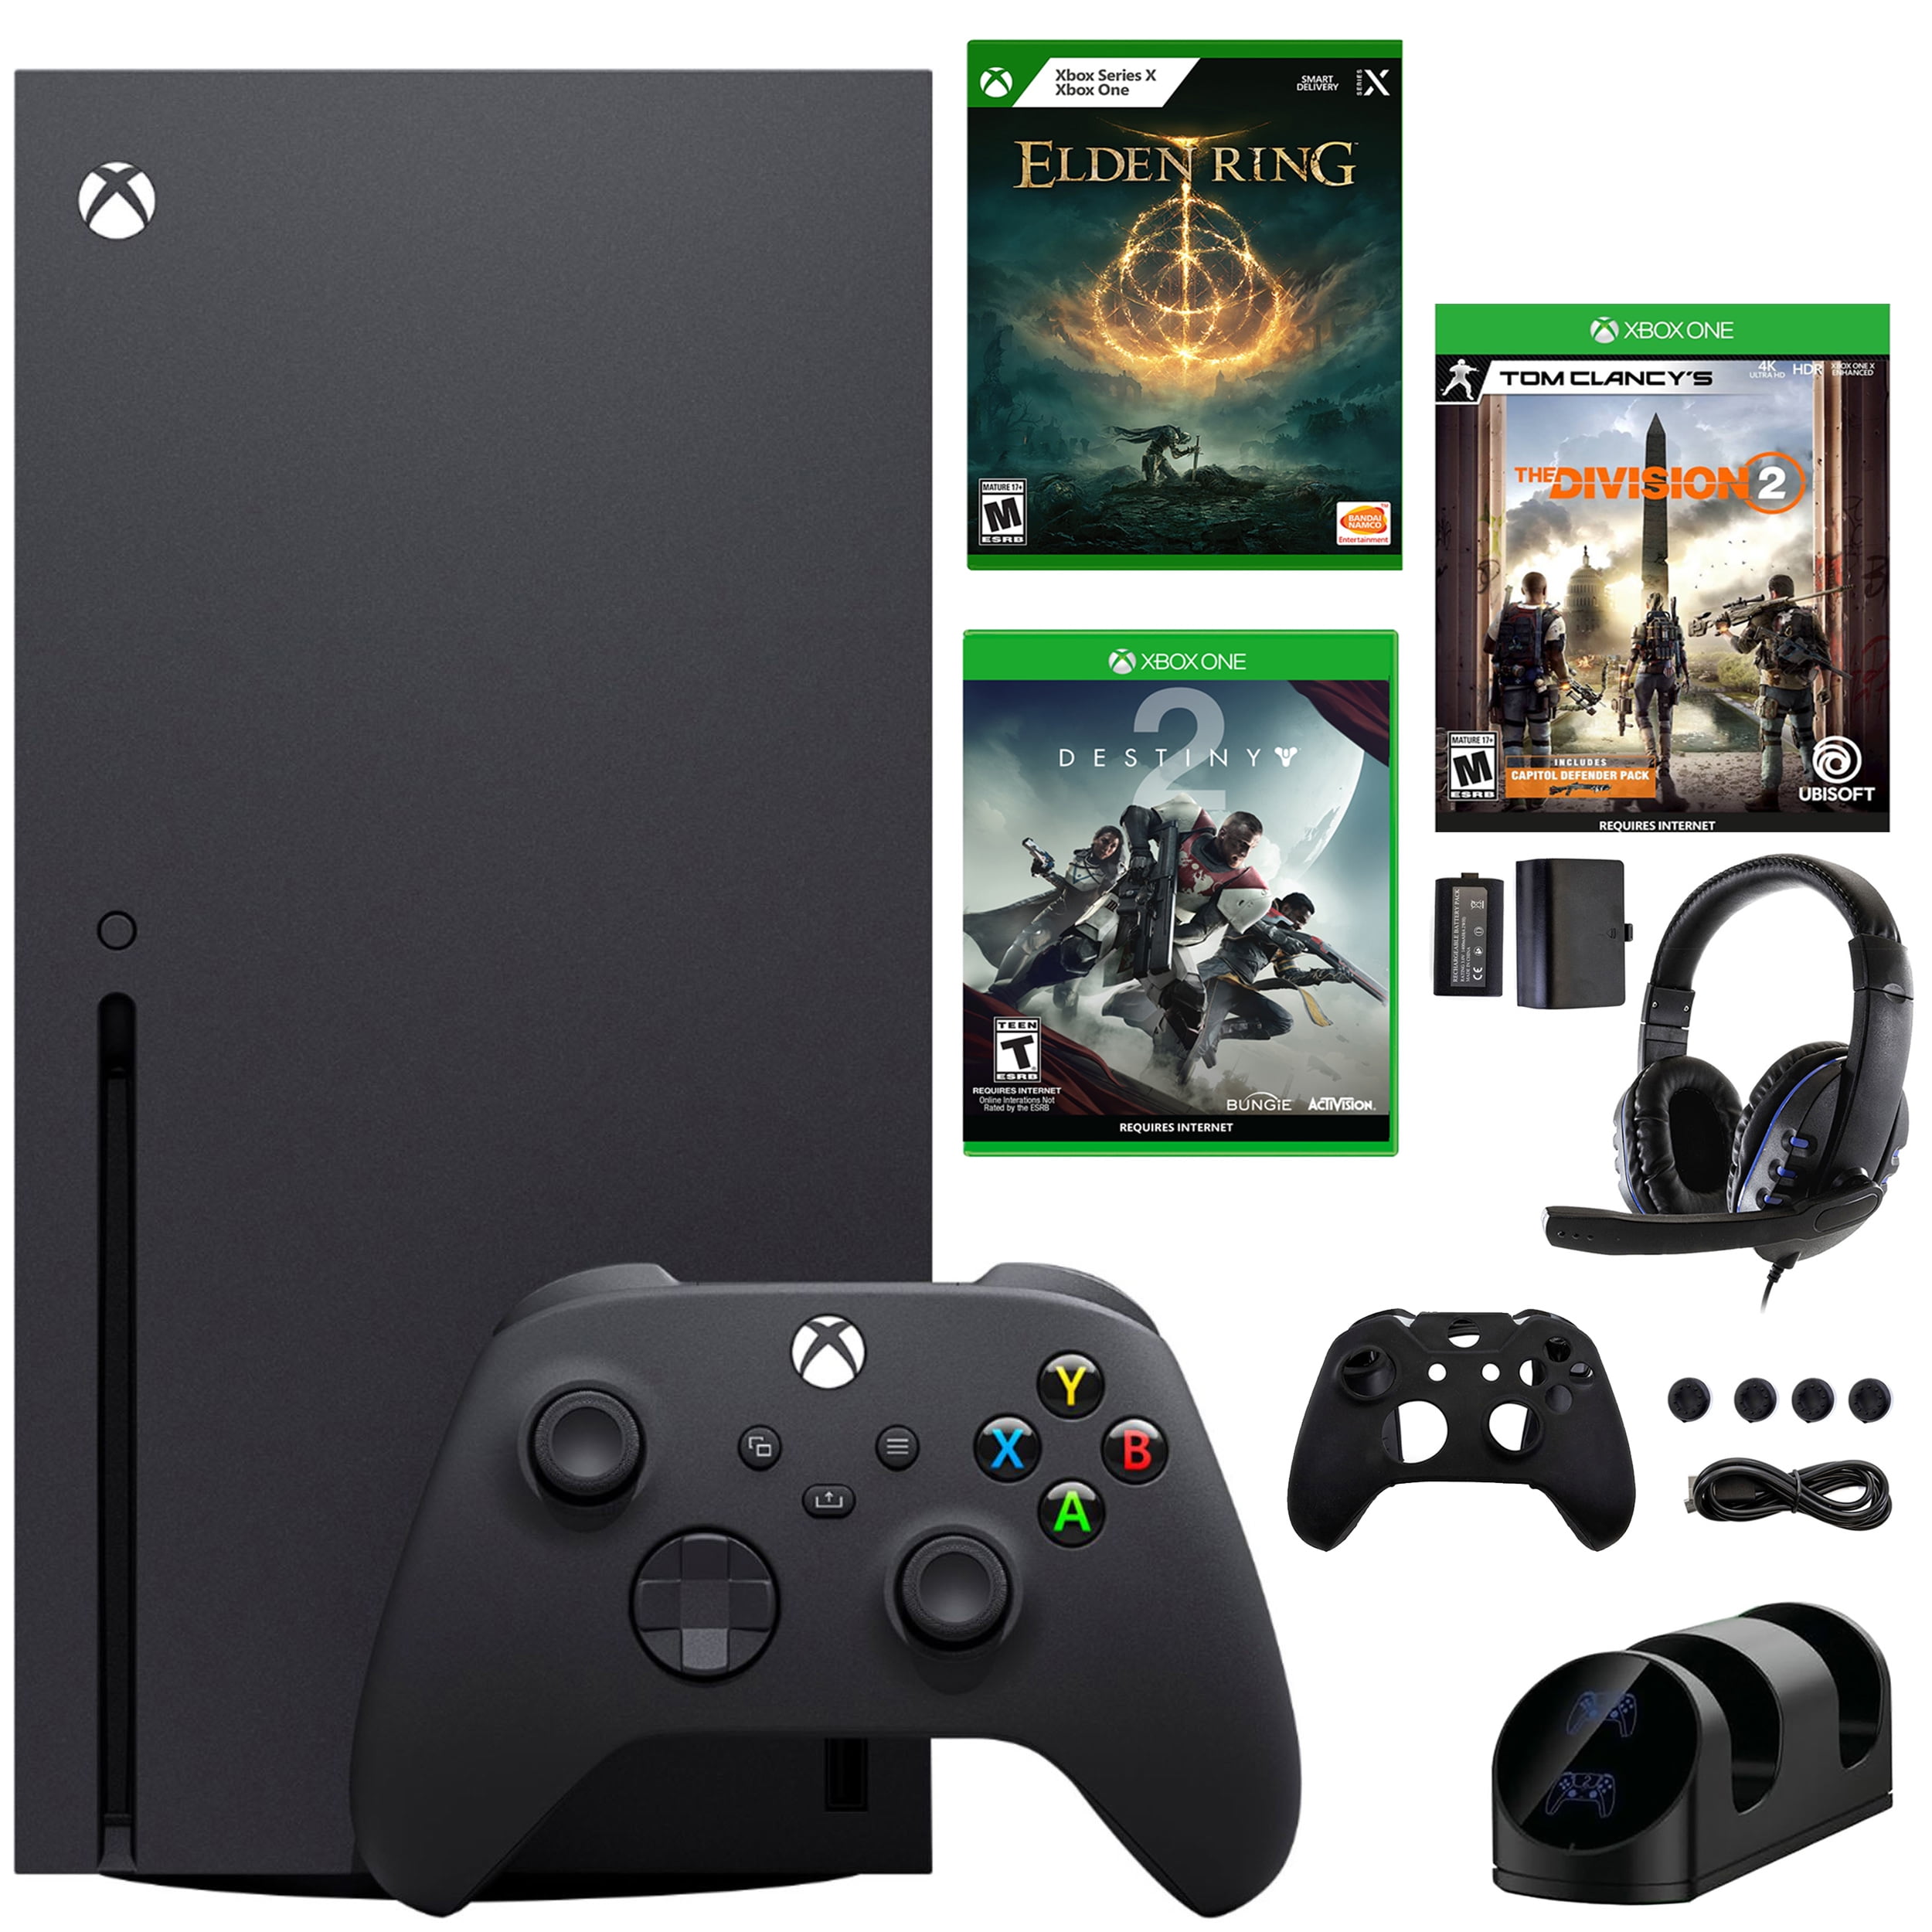 Hd Four Play Video Xxx - Xbox Series X 1TB Console with Elden Ring and Accessories Kit Microsoft -  Walmart.com